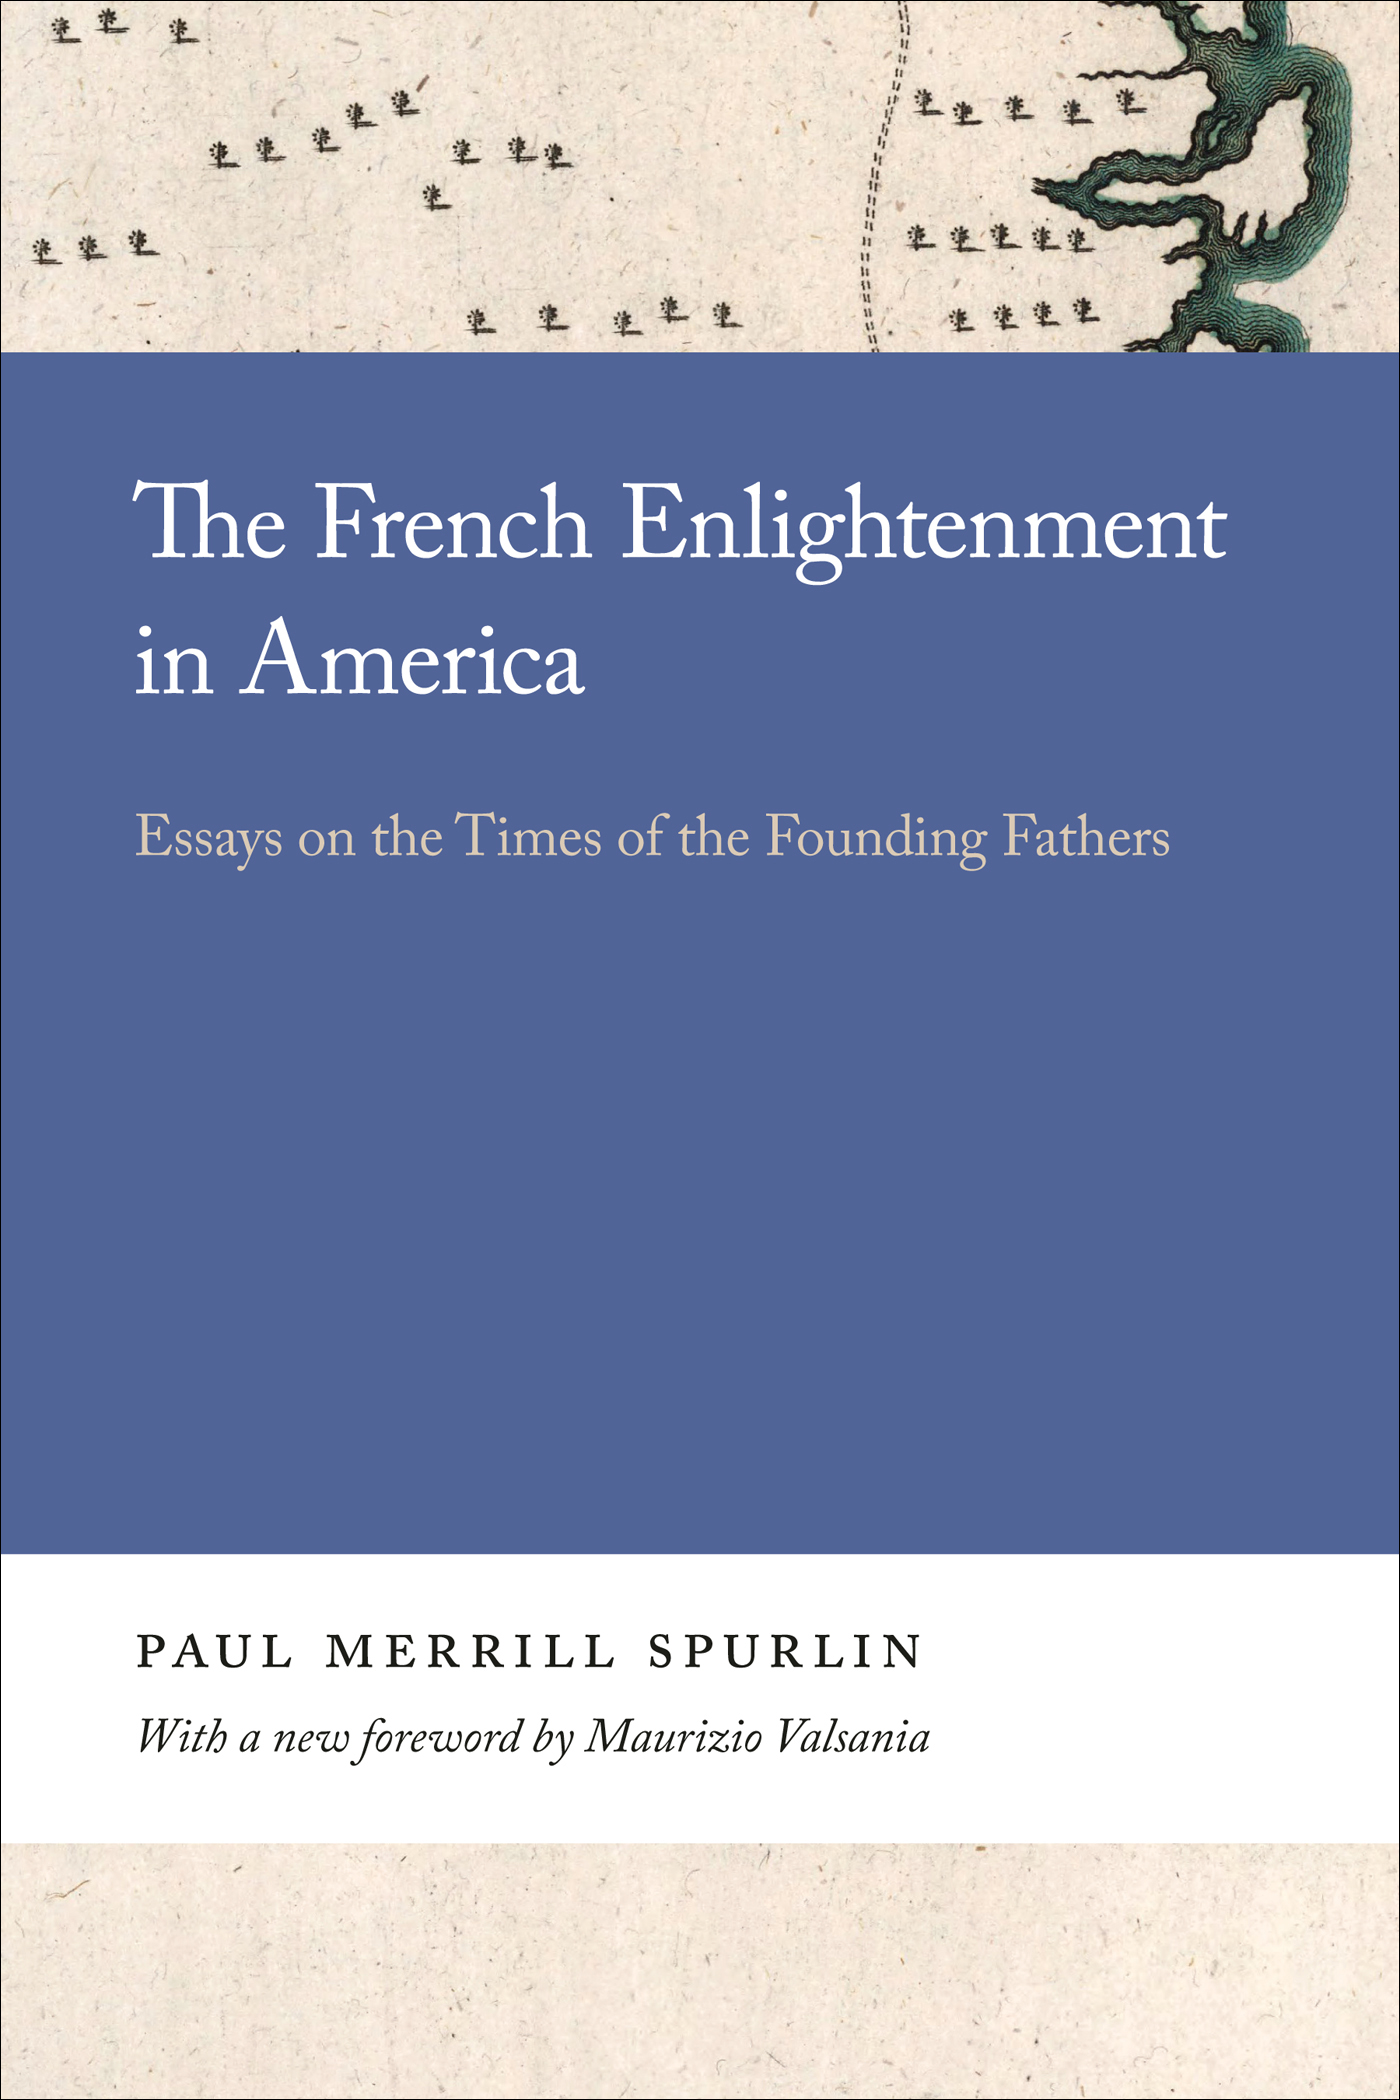 Cover page of the book “The French Enlightenment in America.”